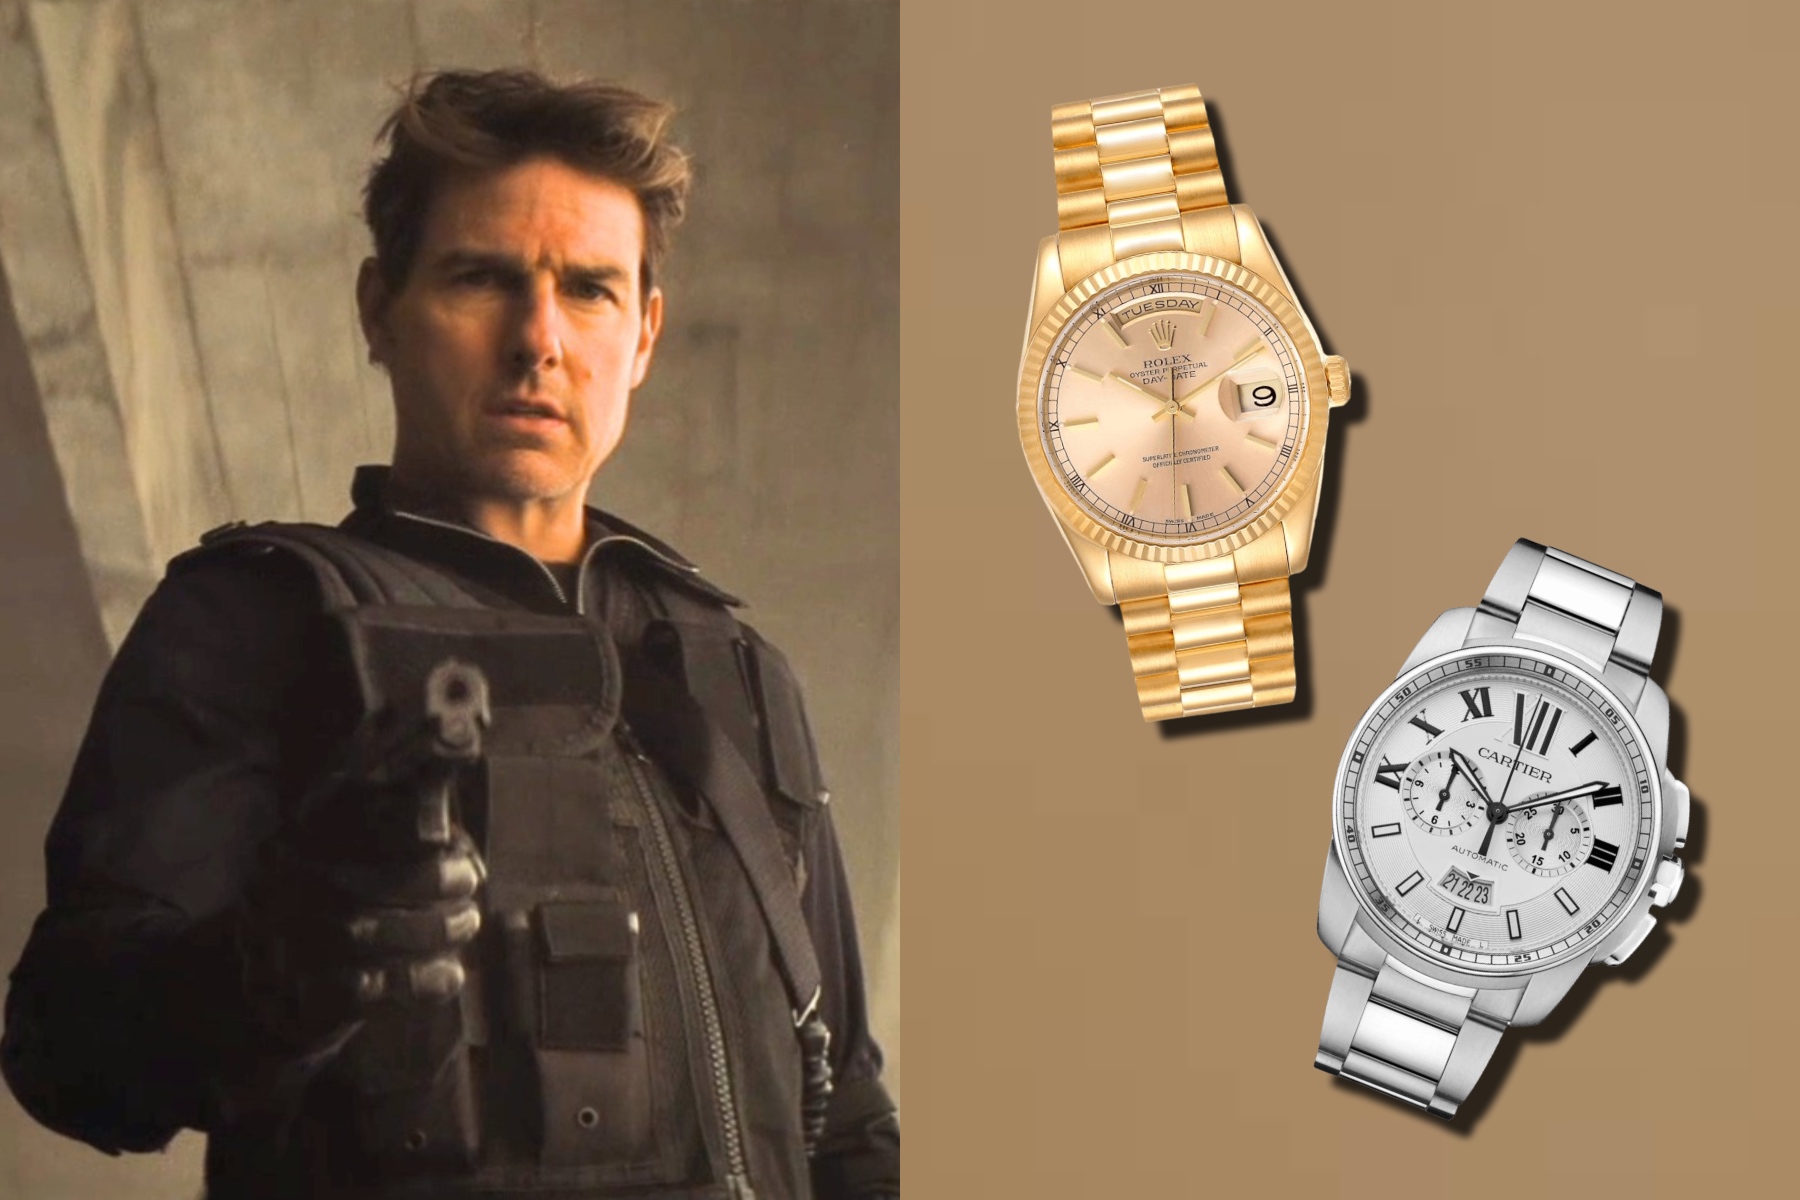 Casio DW290-1V] The mission impossible watch : r/Watches